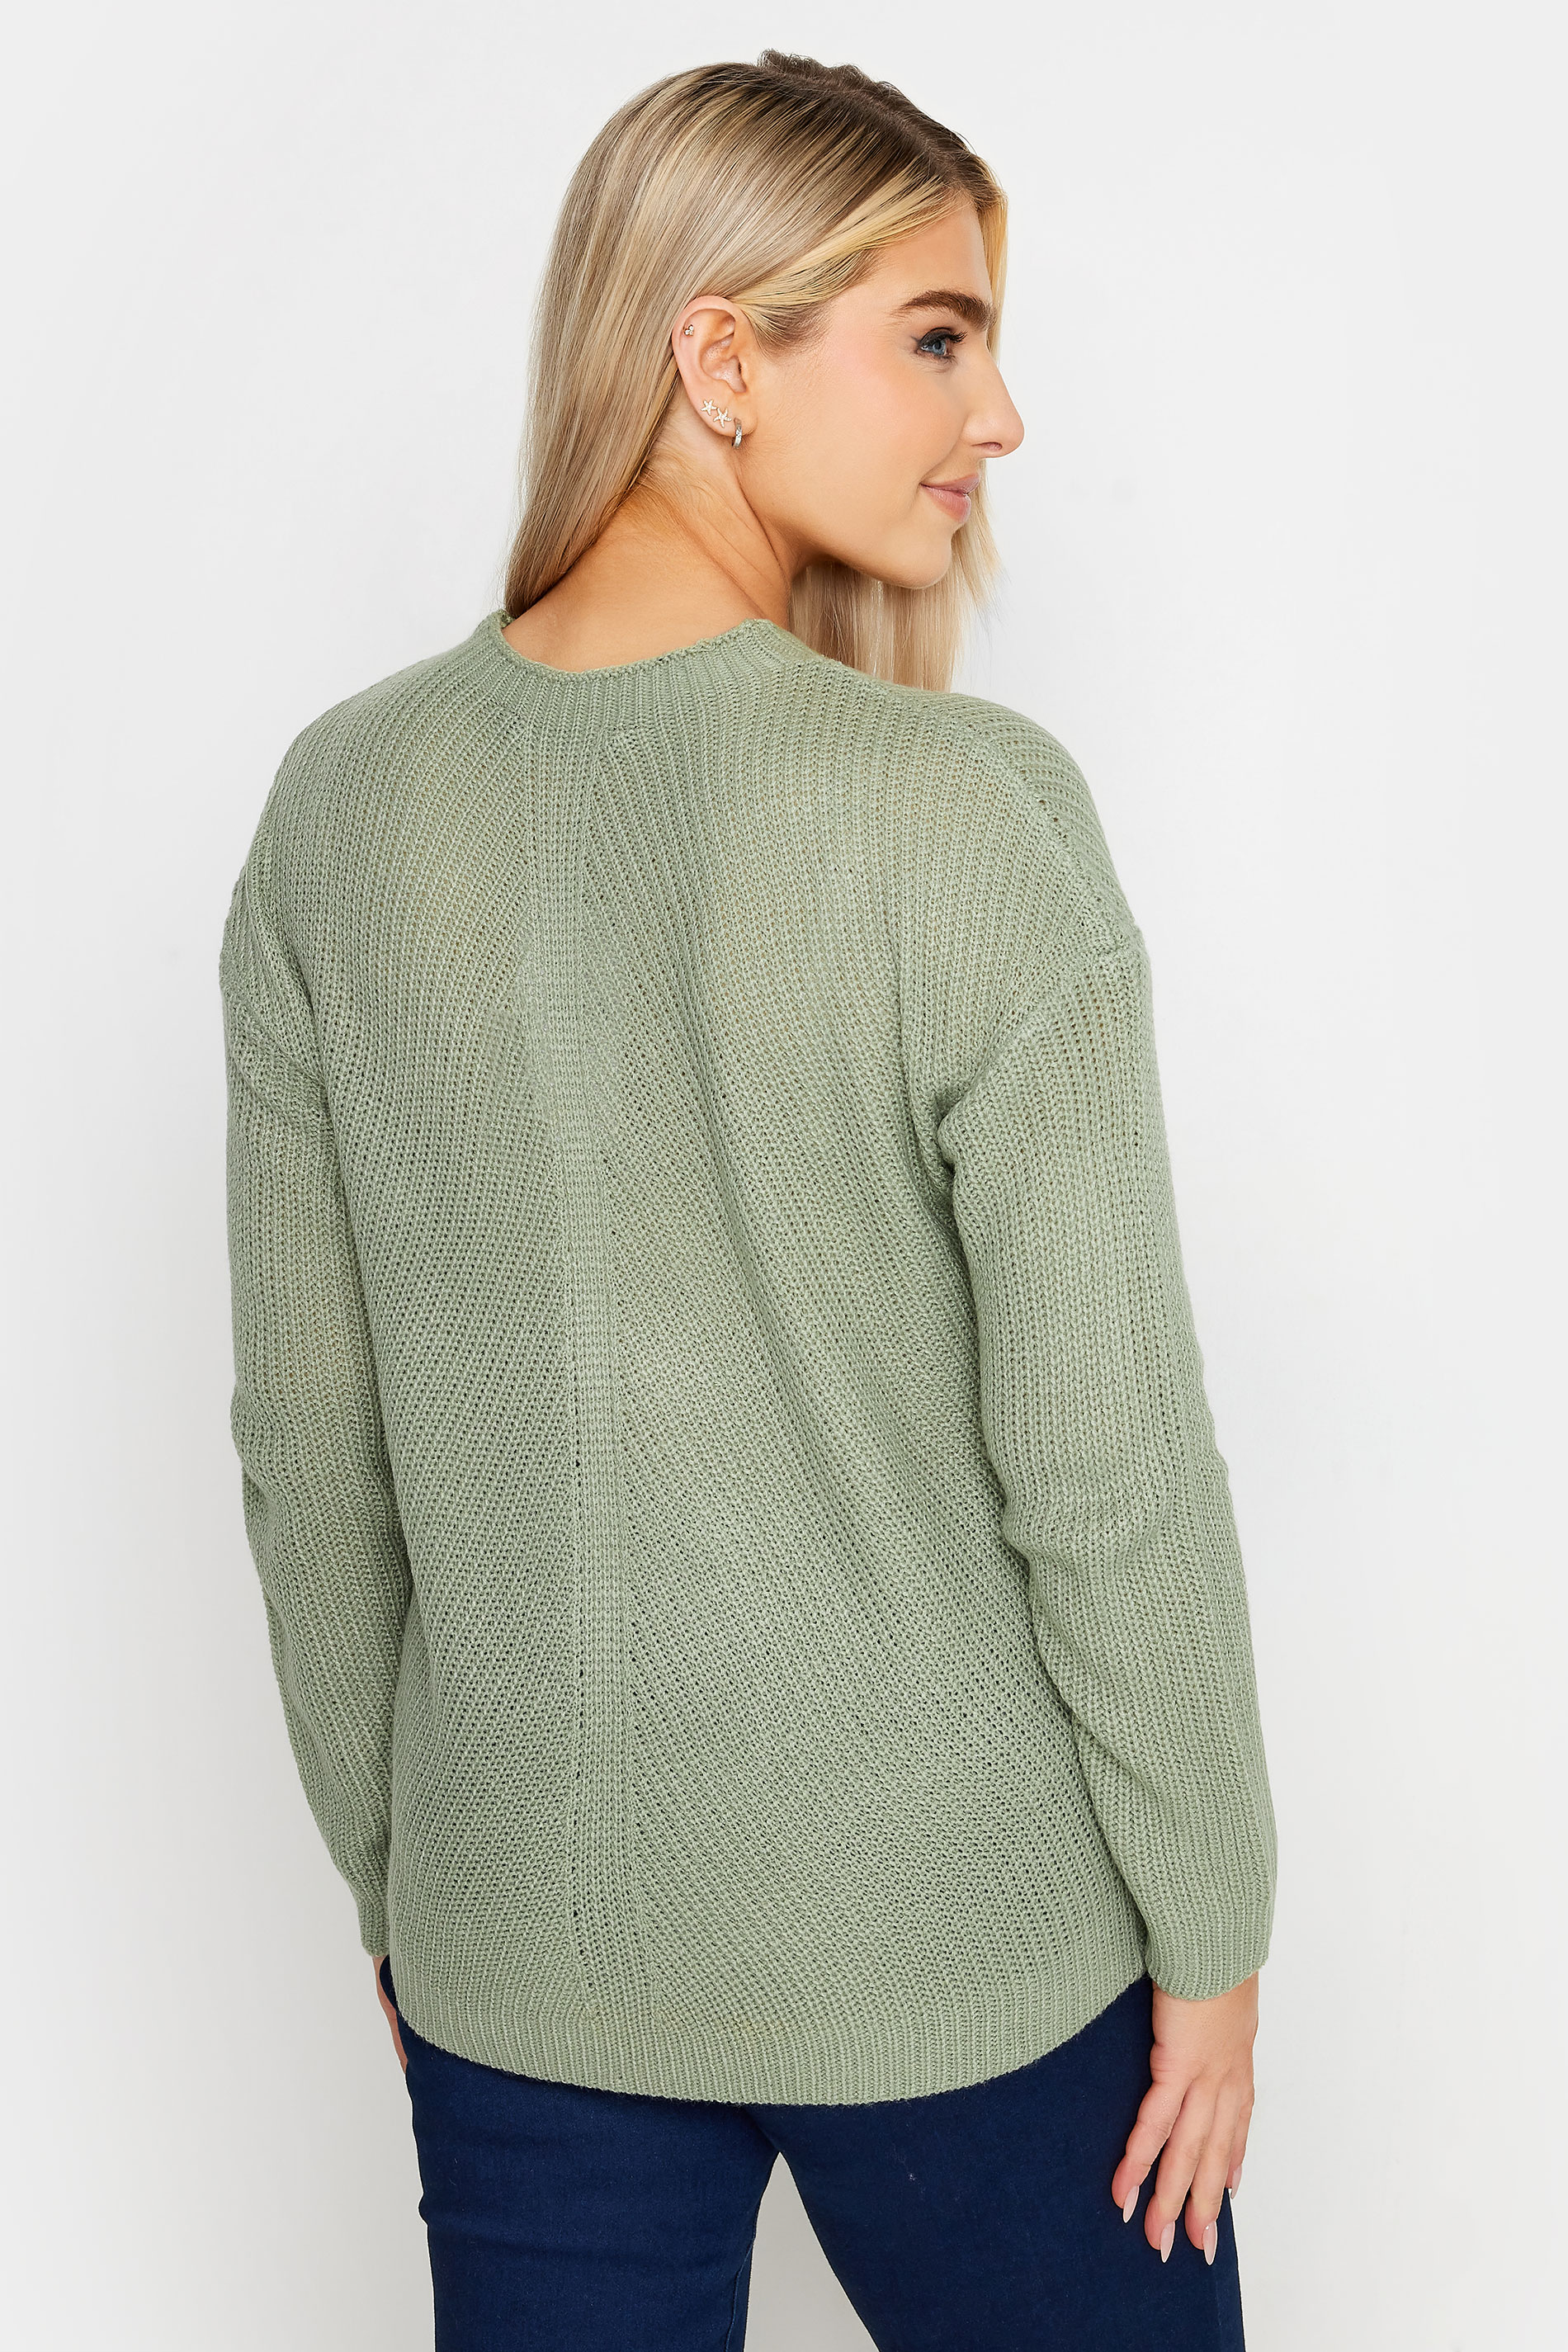 M&Co Green Funnel Neck Knitted Jumper | M&Co 3